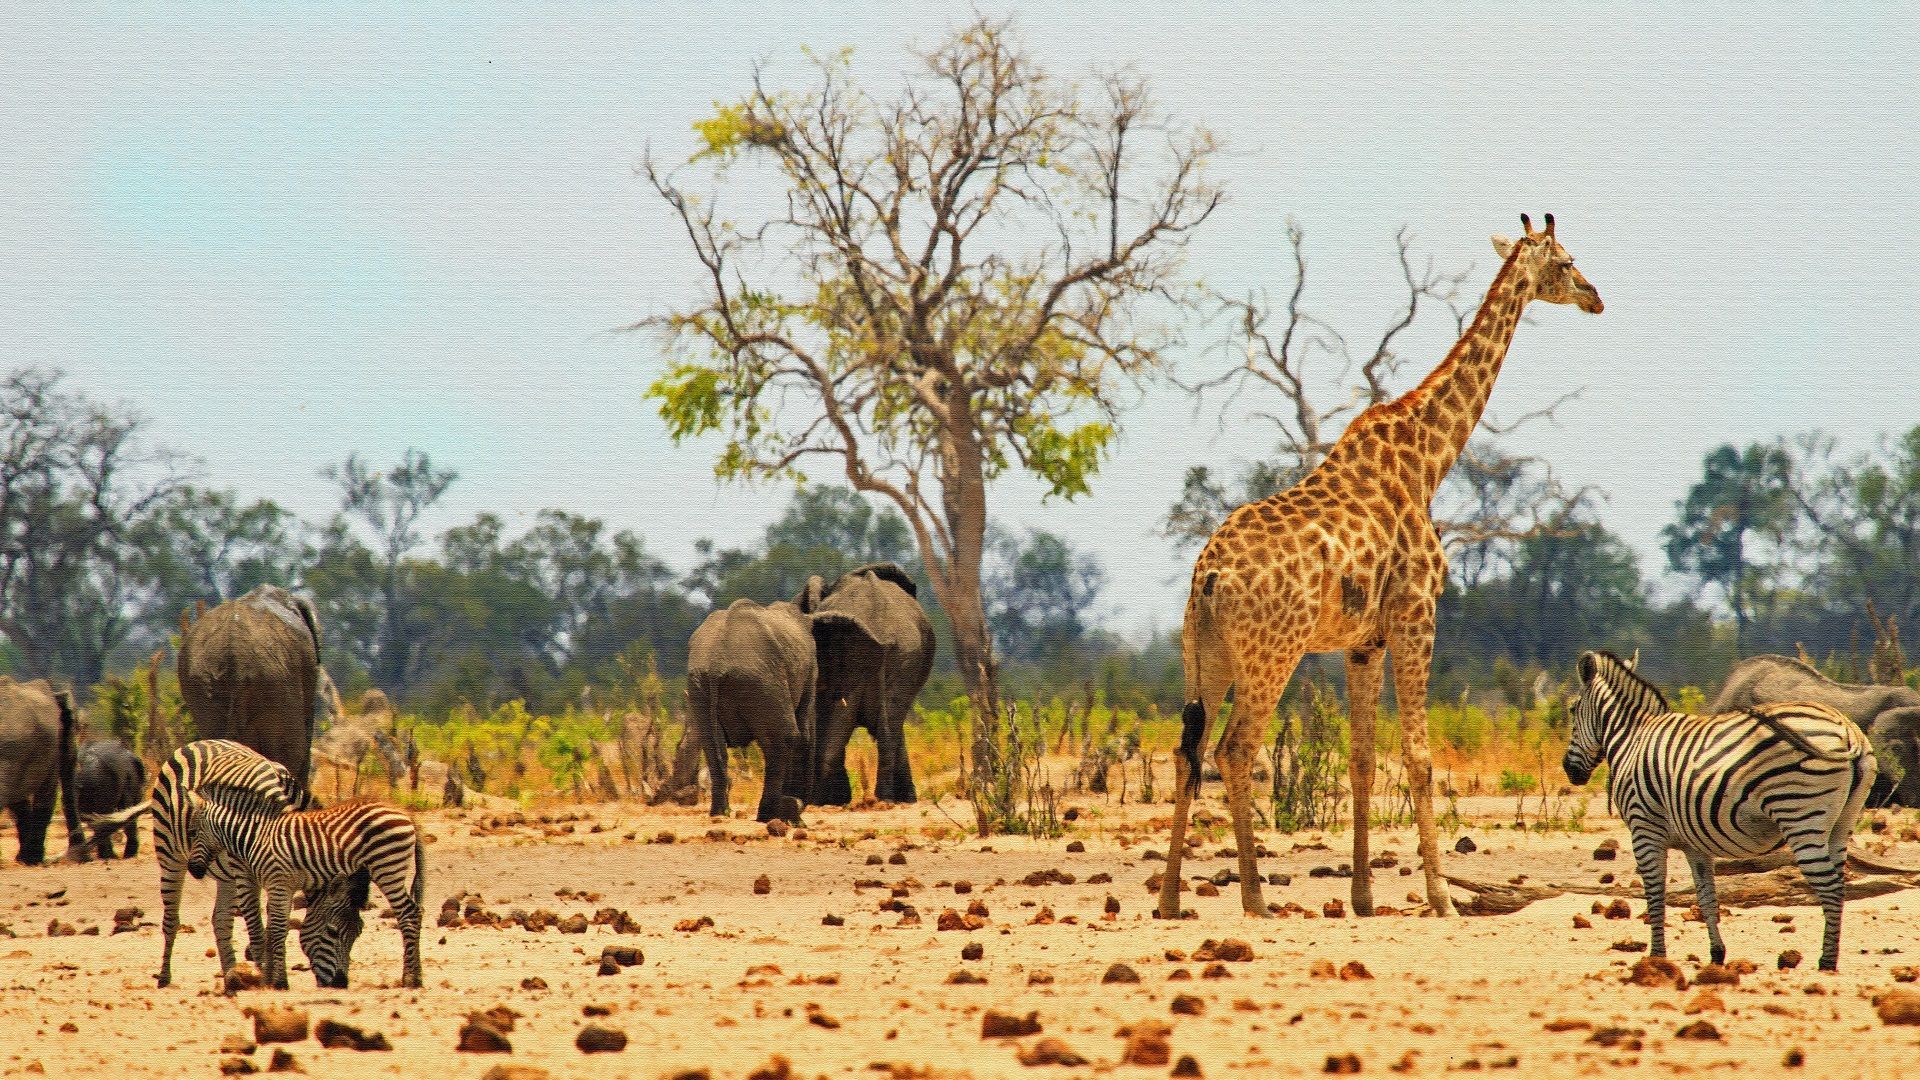 8 Best National Parks In Africa For Wildlife Safaris: An Ultimate Guide ...